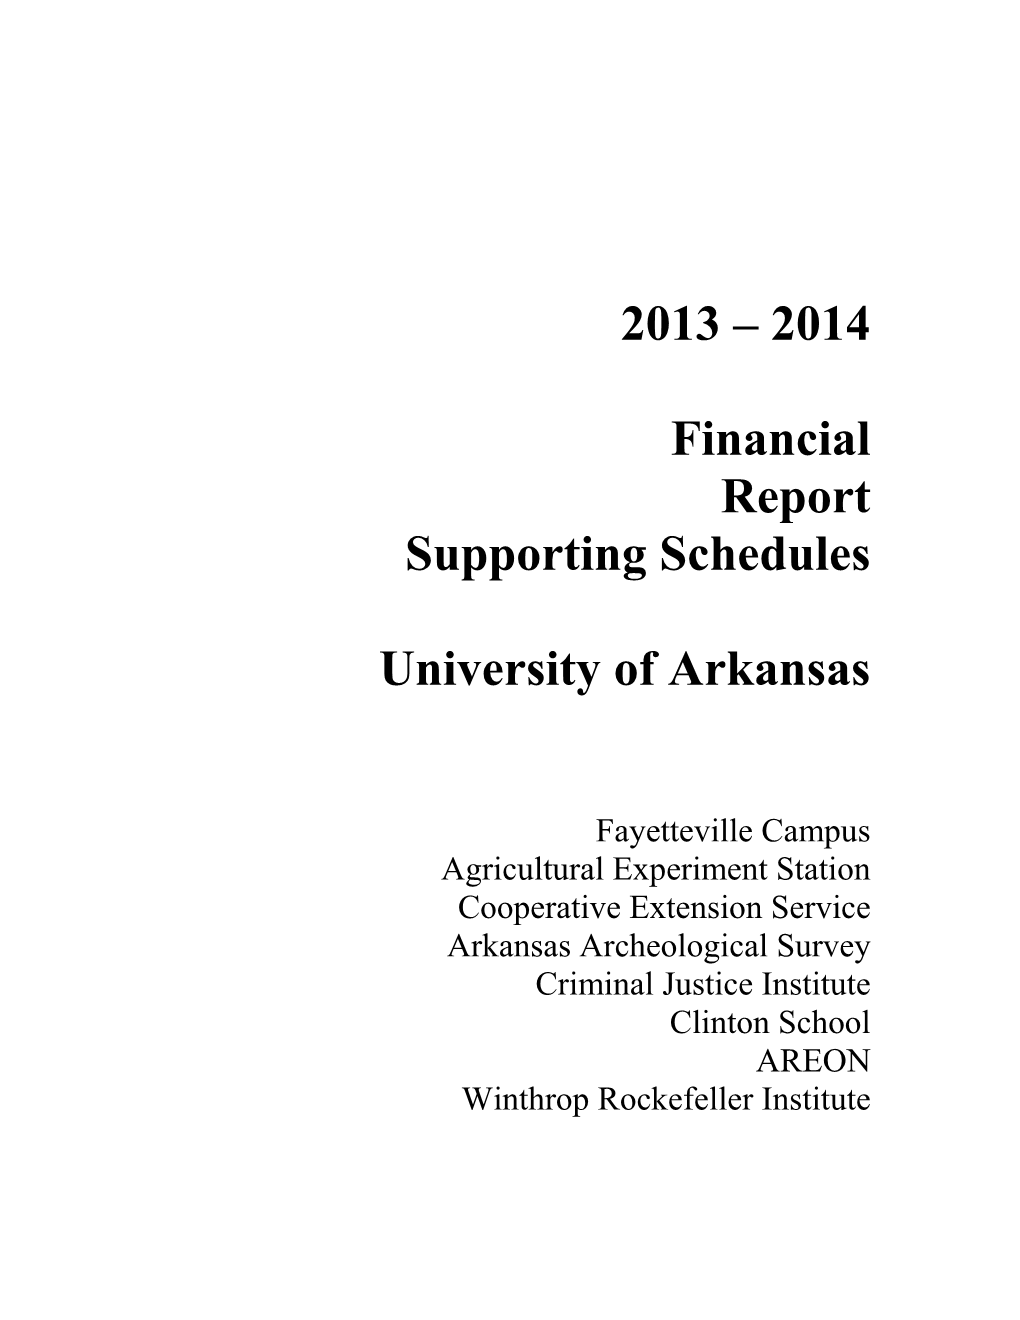 2014 Financial Report Supporting Schedules